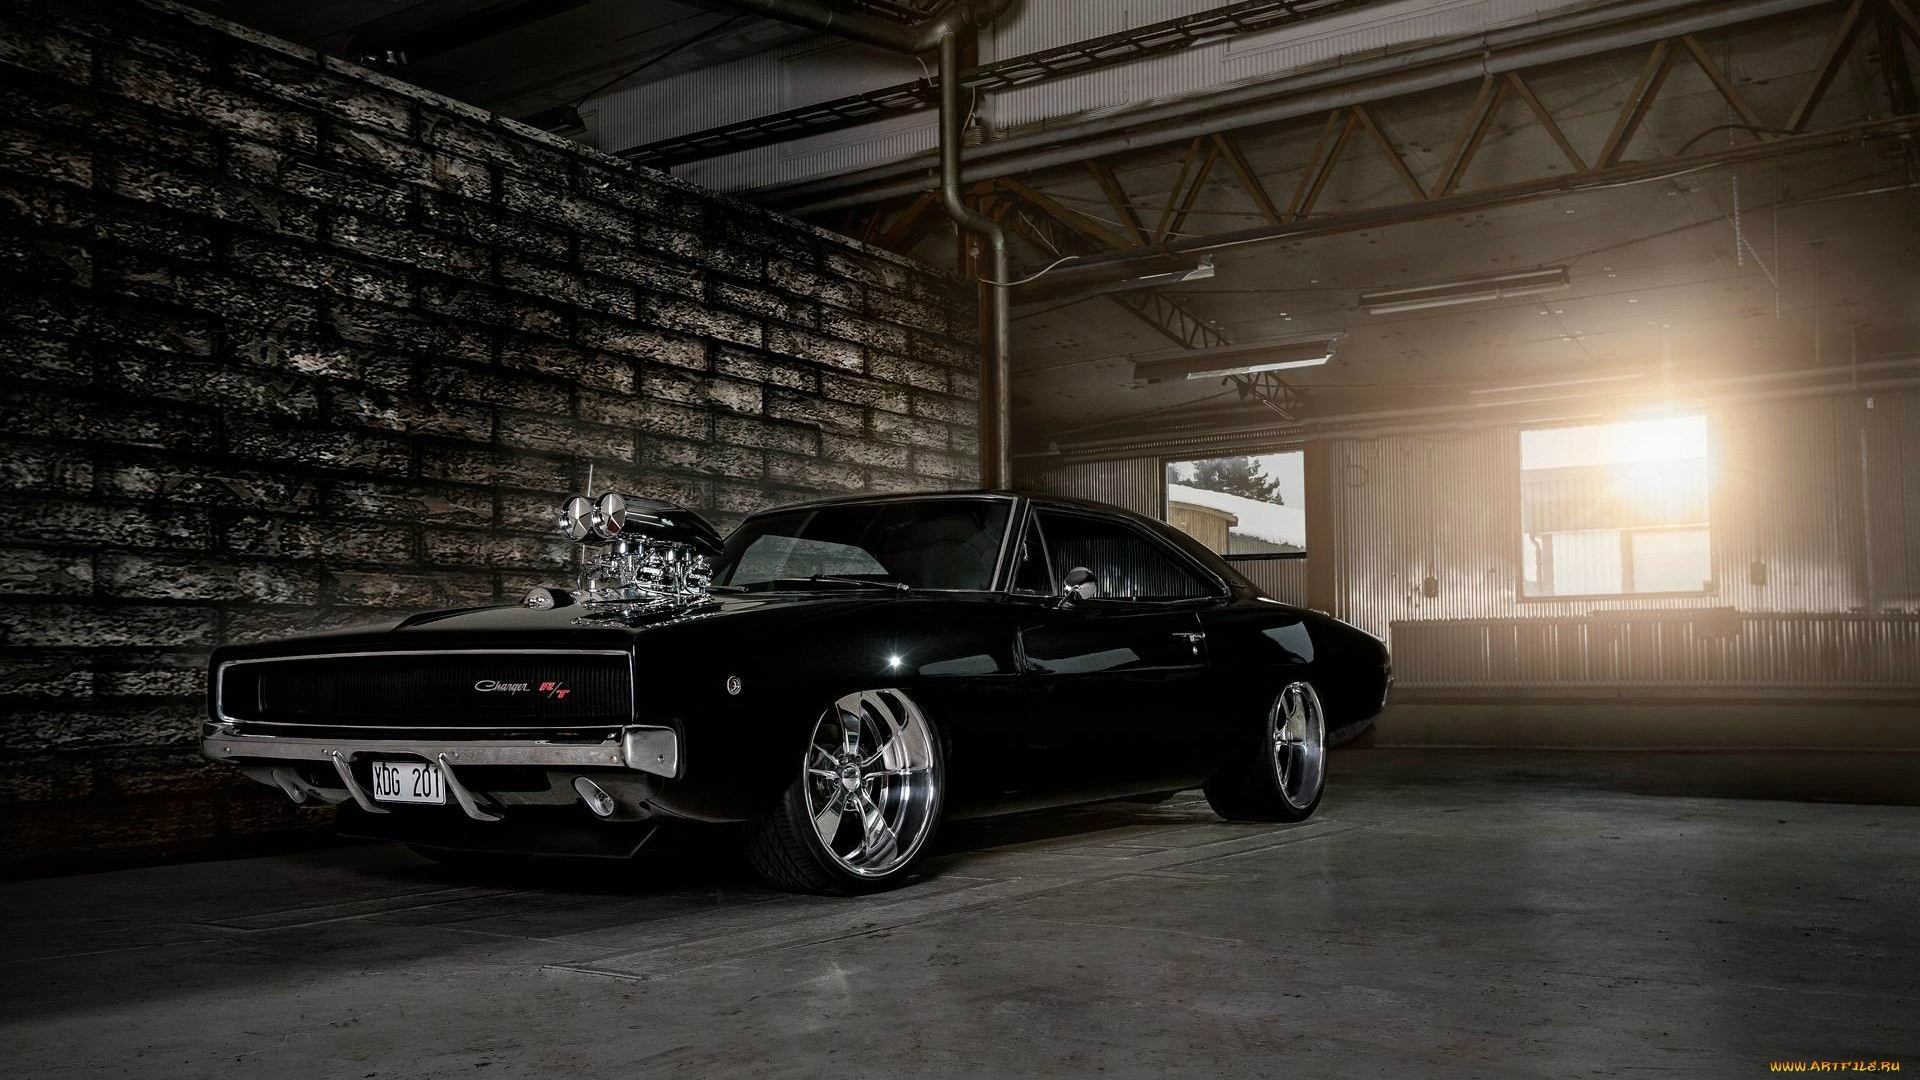 1920x1080 Dodge Charger 1968 muscle cars hot rod engine wallpaper |  | 71442  | WallpaperUP